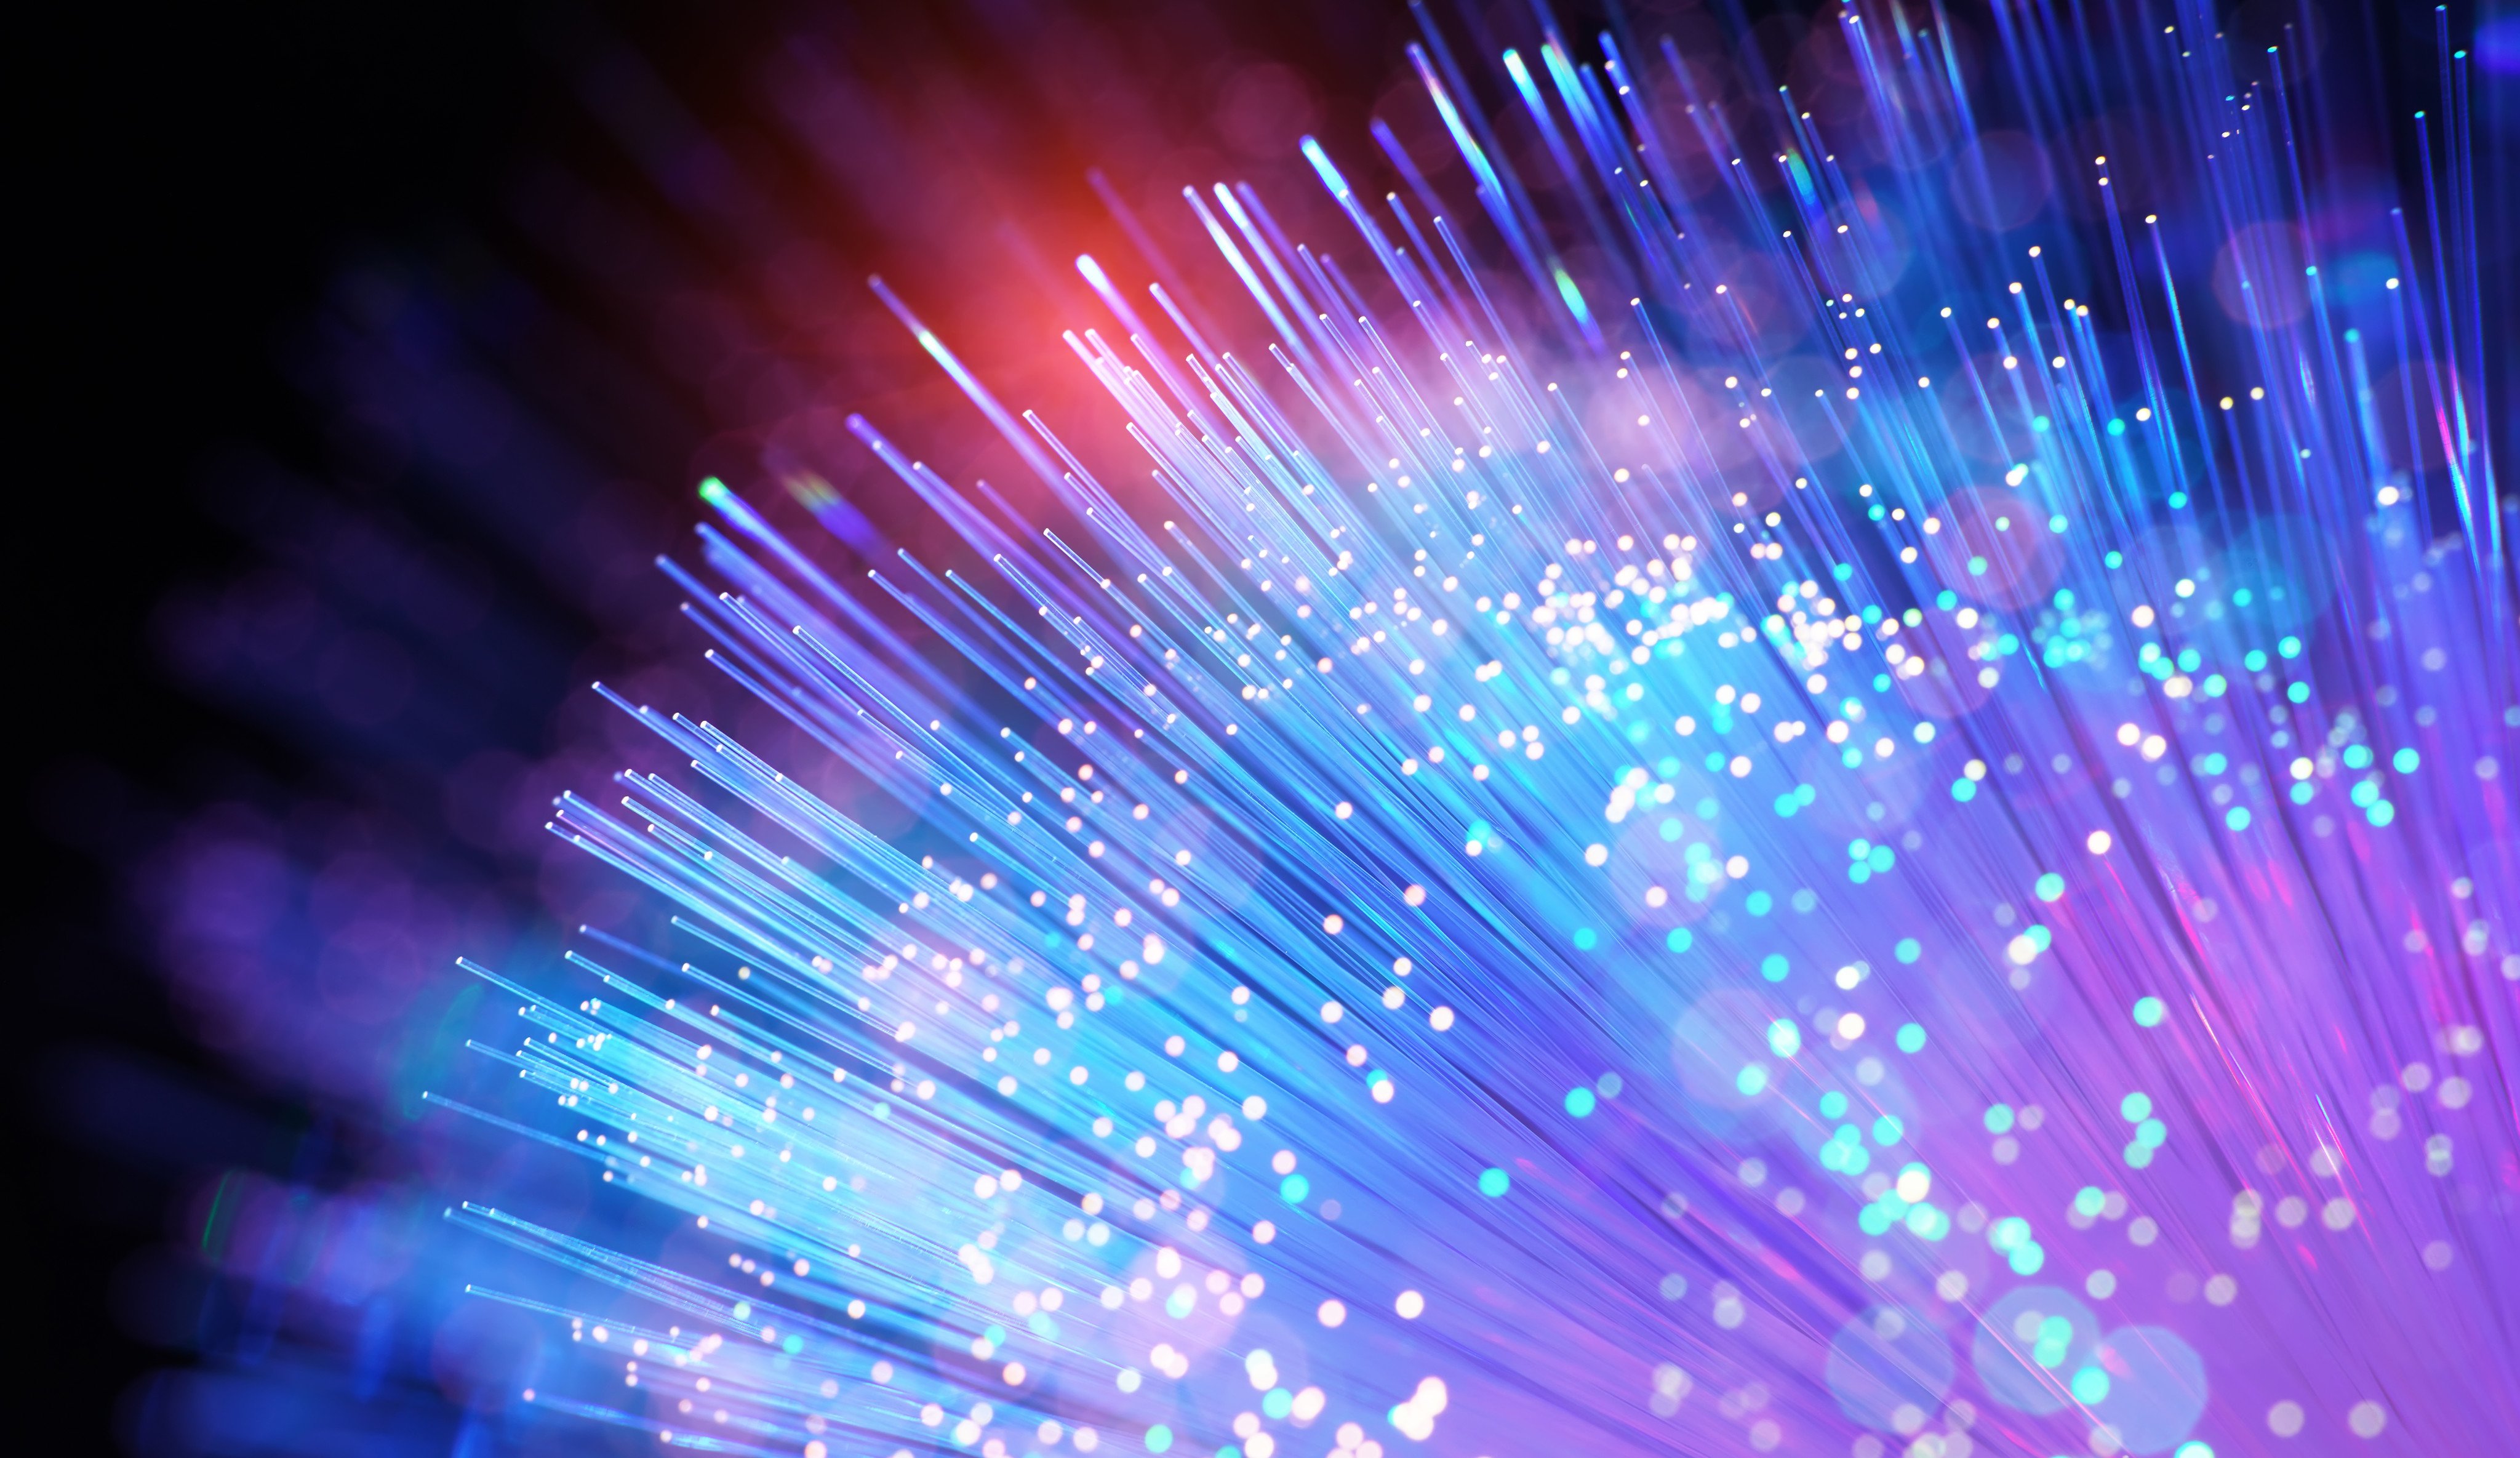 Teams in three countries have independently achieved what the journal Nature called the most advanced demonstrations yet of quantum internet technology. Photo: Shutterstock